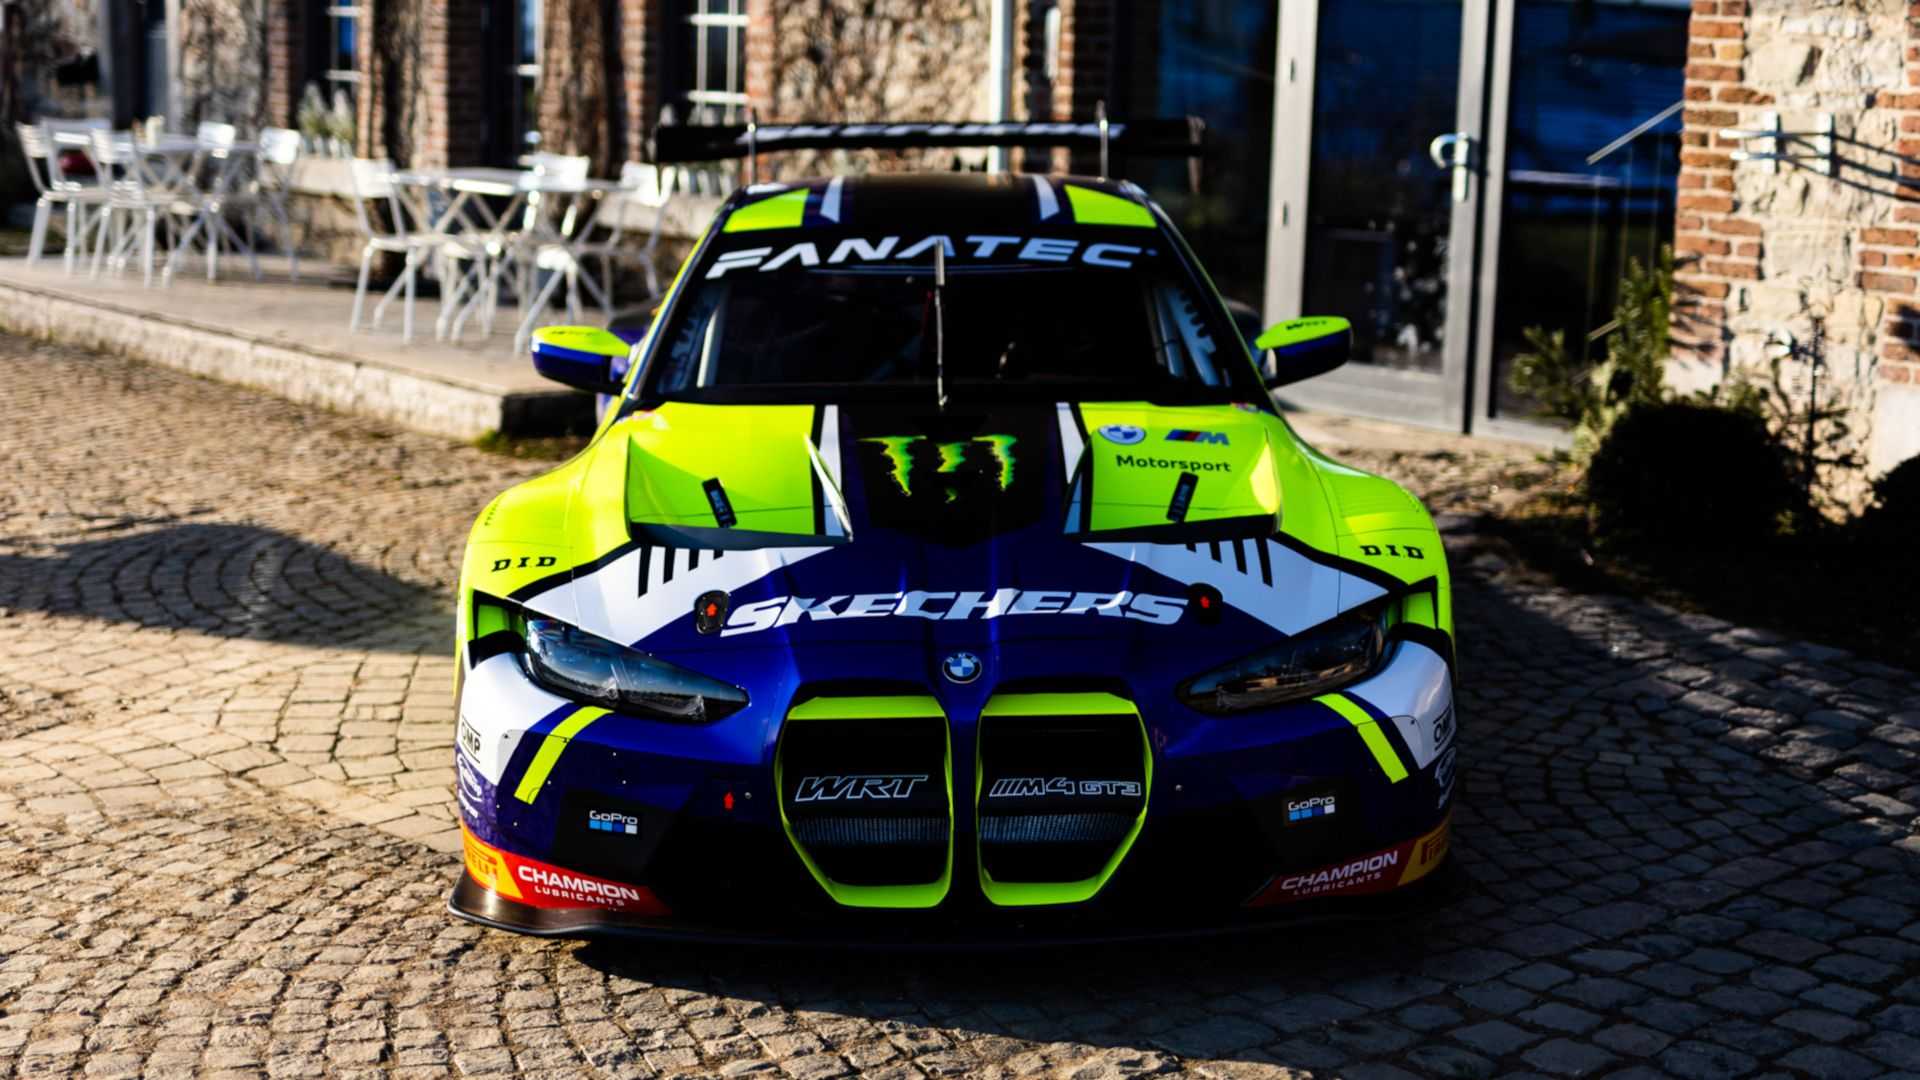 valentino-rossi-joins-bmw-m-motorsport-driver-roster-in-2023